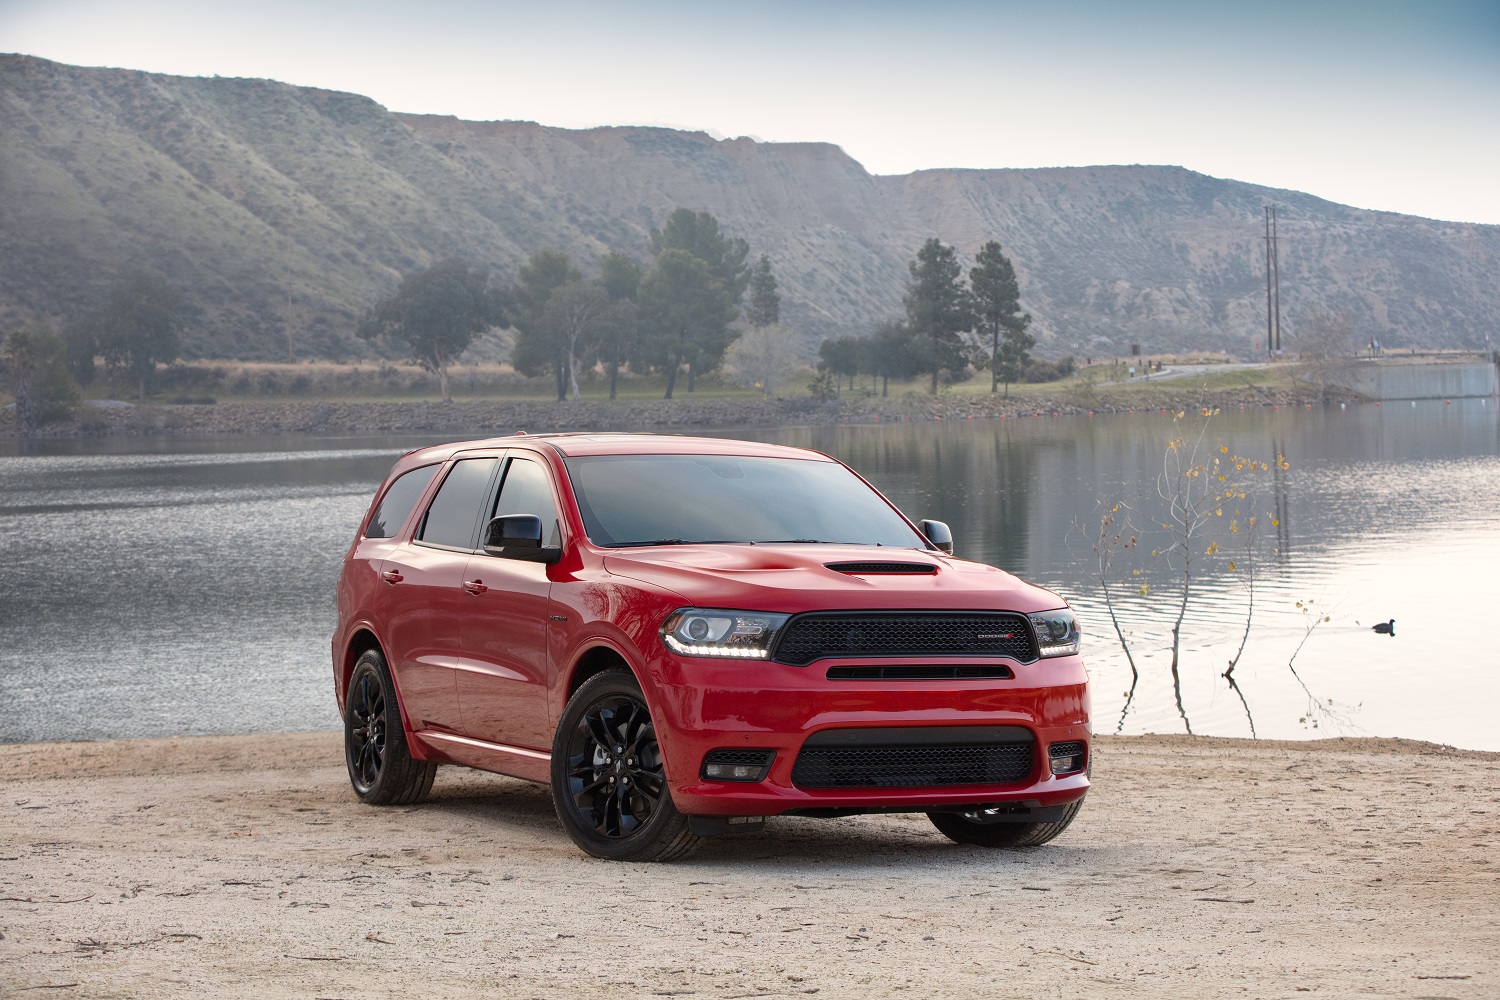 New Dodge available in Morgantown, WV at Chrysler Dodge Jeep Ram FIAT
of Morgantown